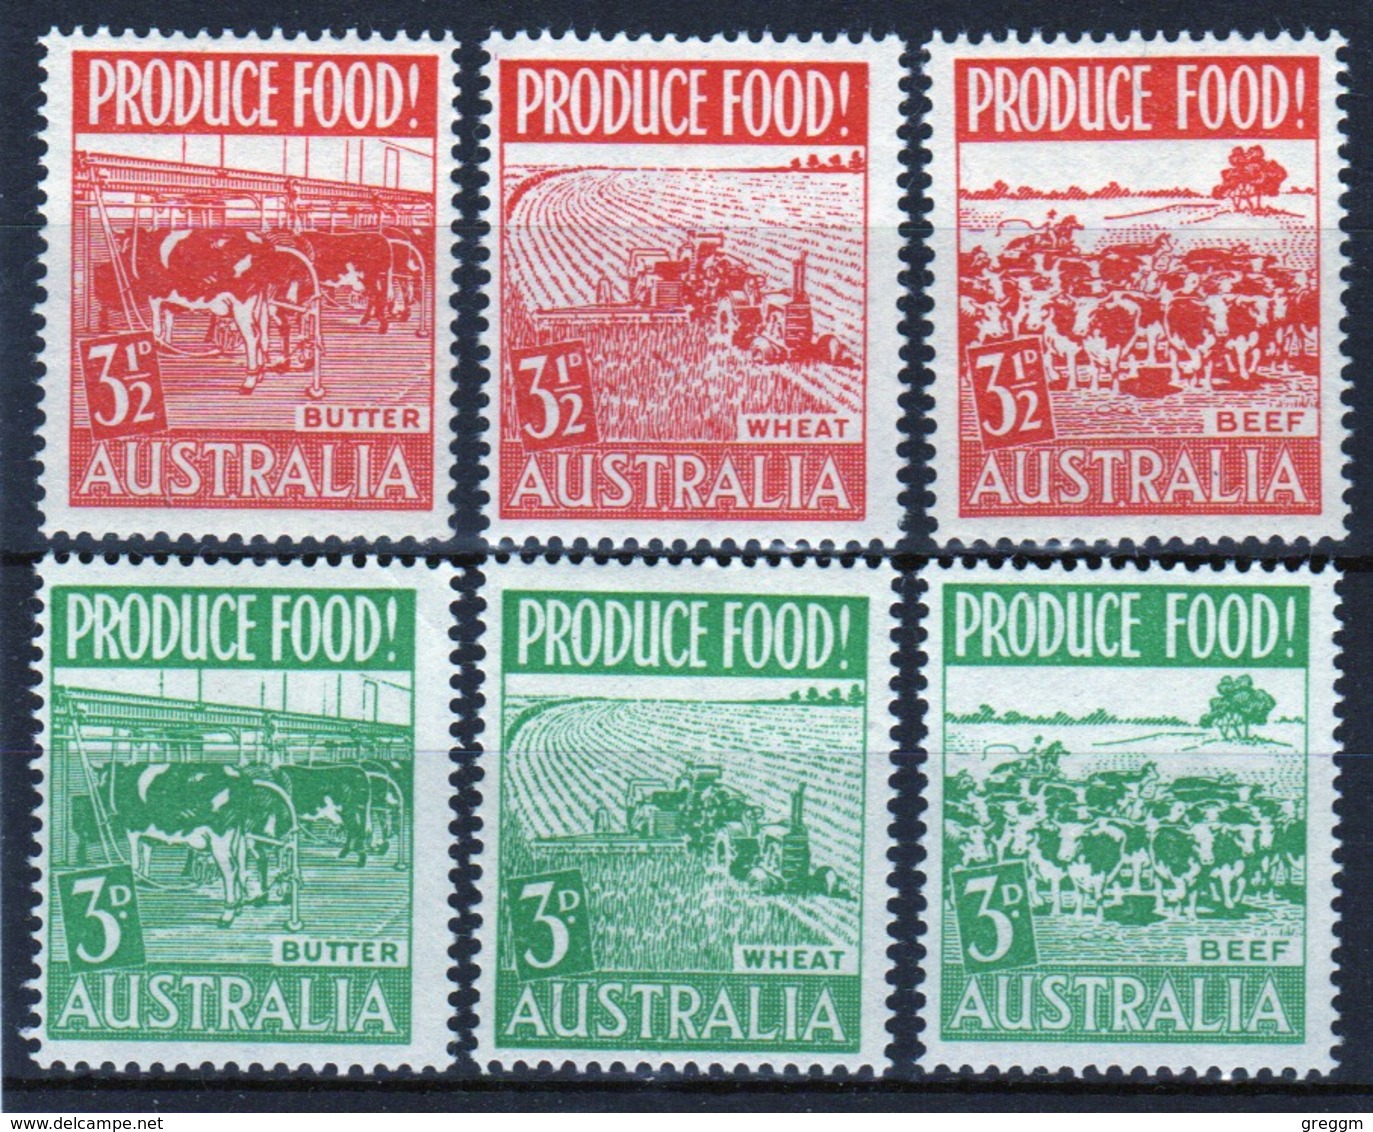 Australia 1953 Set Of Stamps To Celebrate Food Production. - Mint Stamps